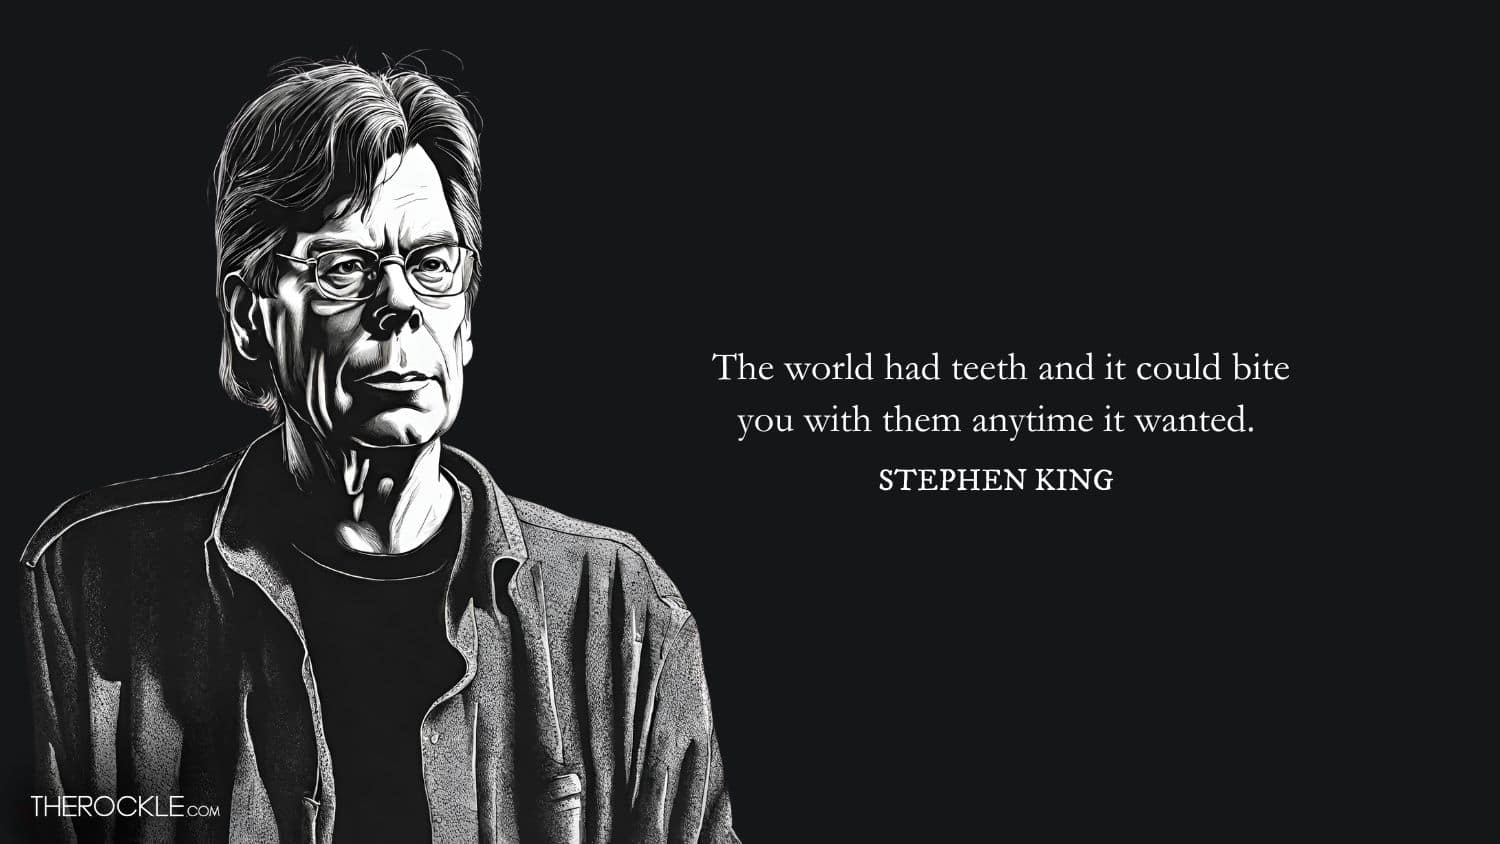 Can You Handle the Chills? Here Are 30 Quotes from Stephen King’s Novels!